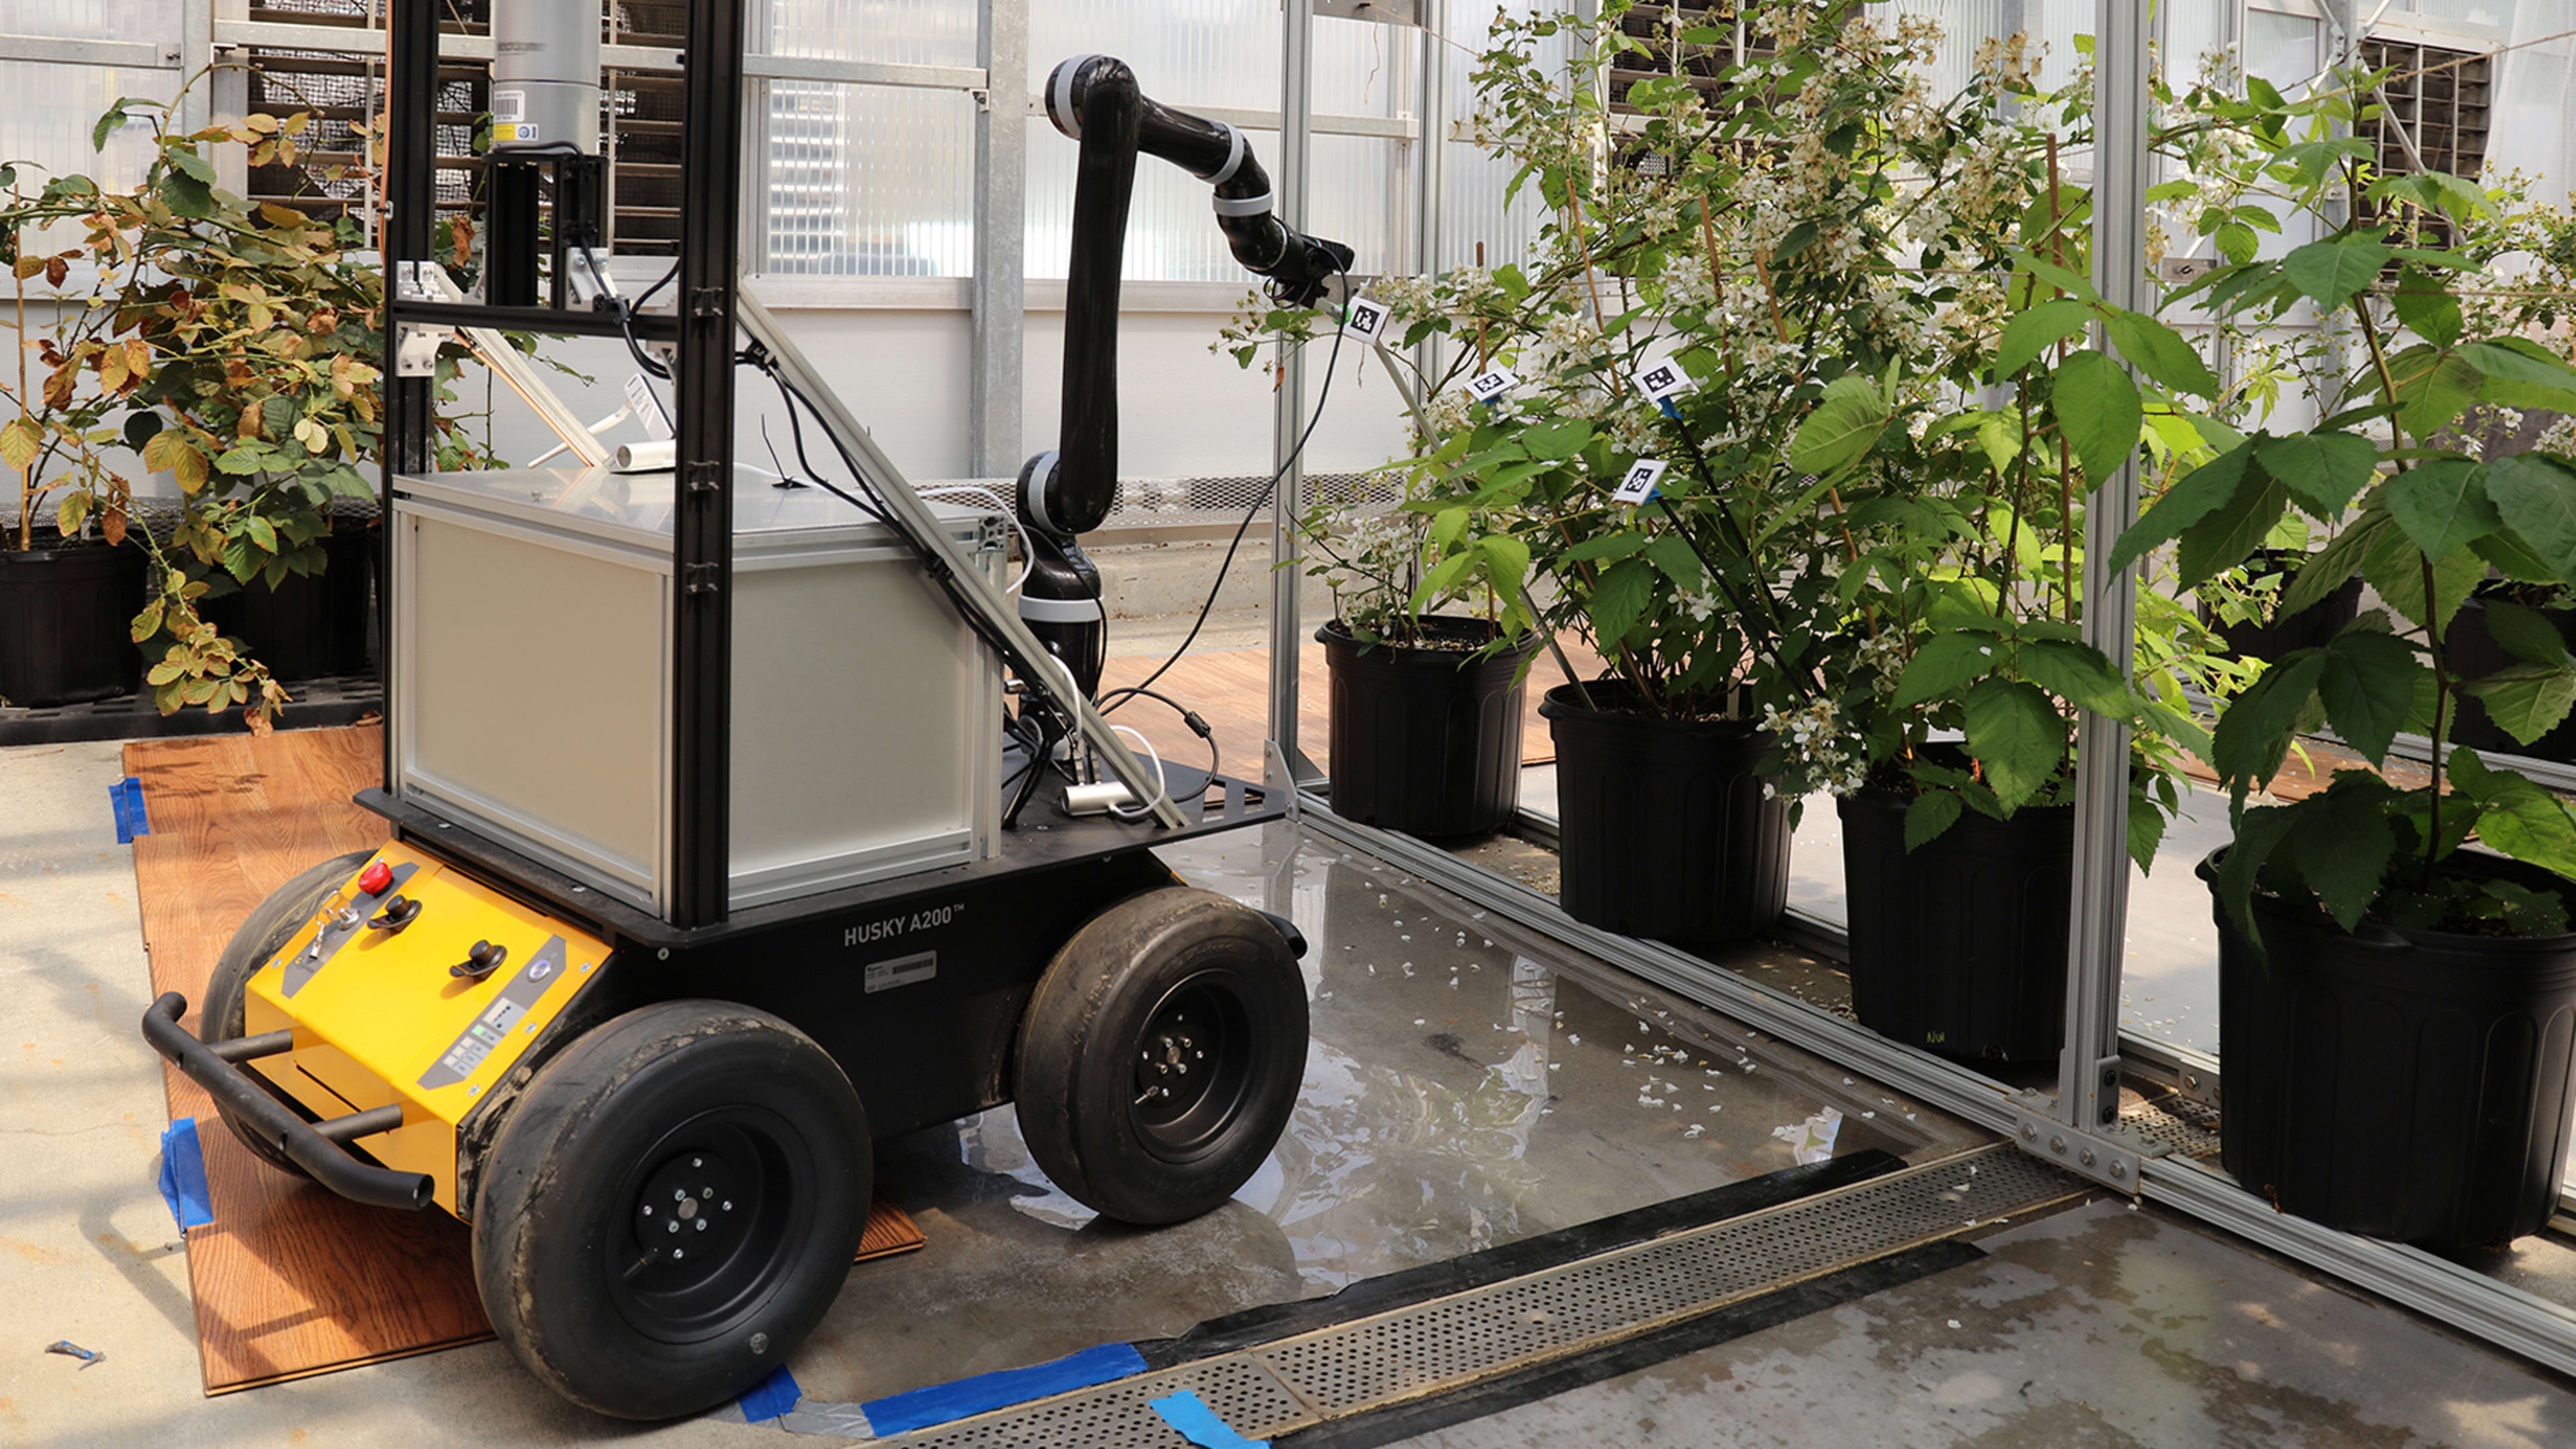 This robot could help pollinate crops if we kill all the bees